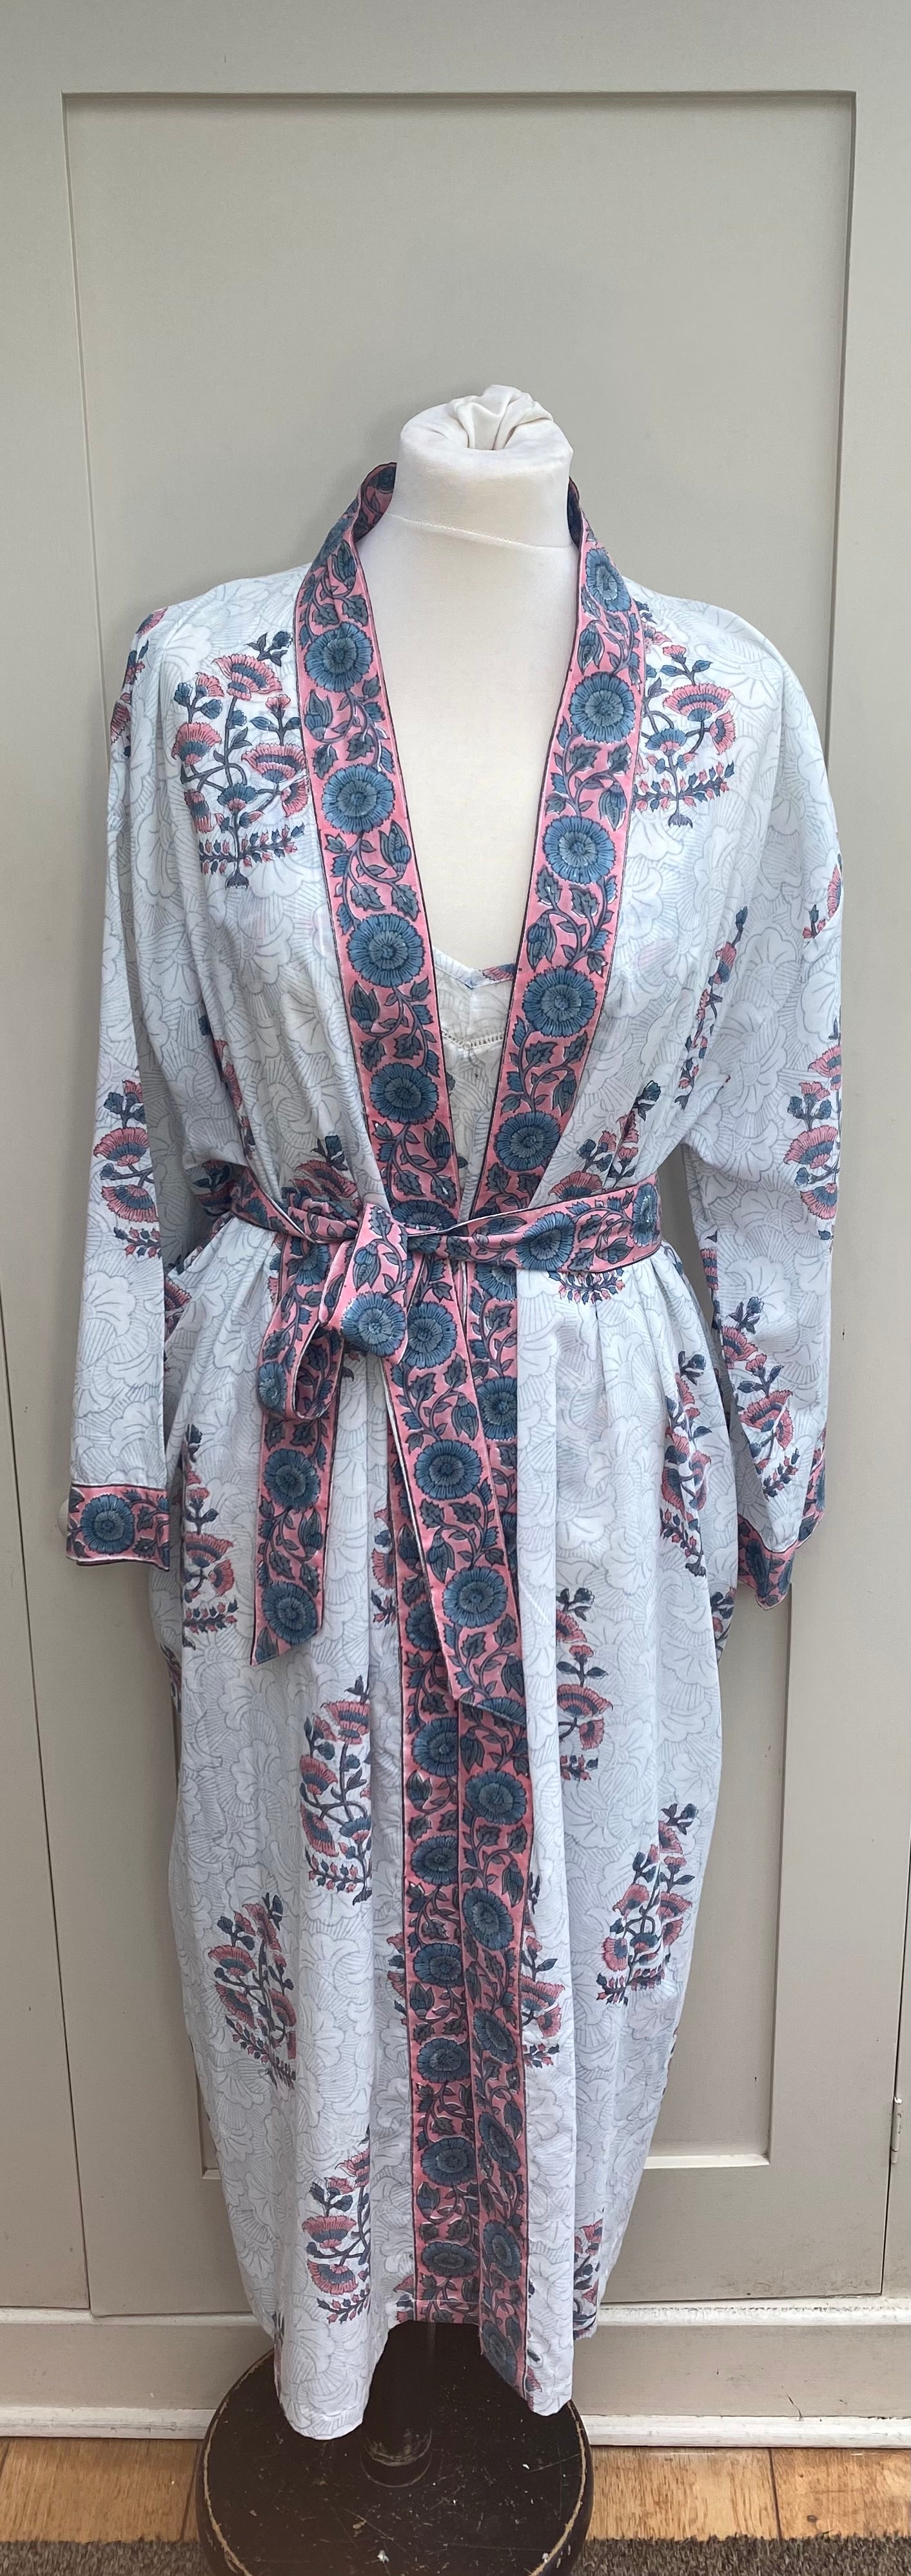 Carla Pink Daisy Nightie and Dressing Gown Set